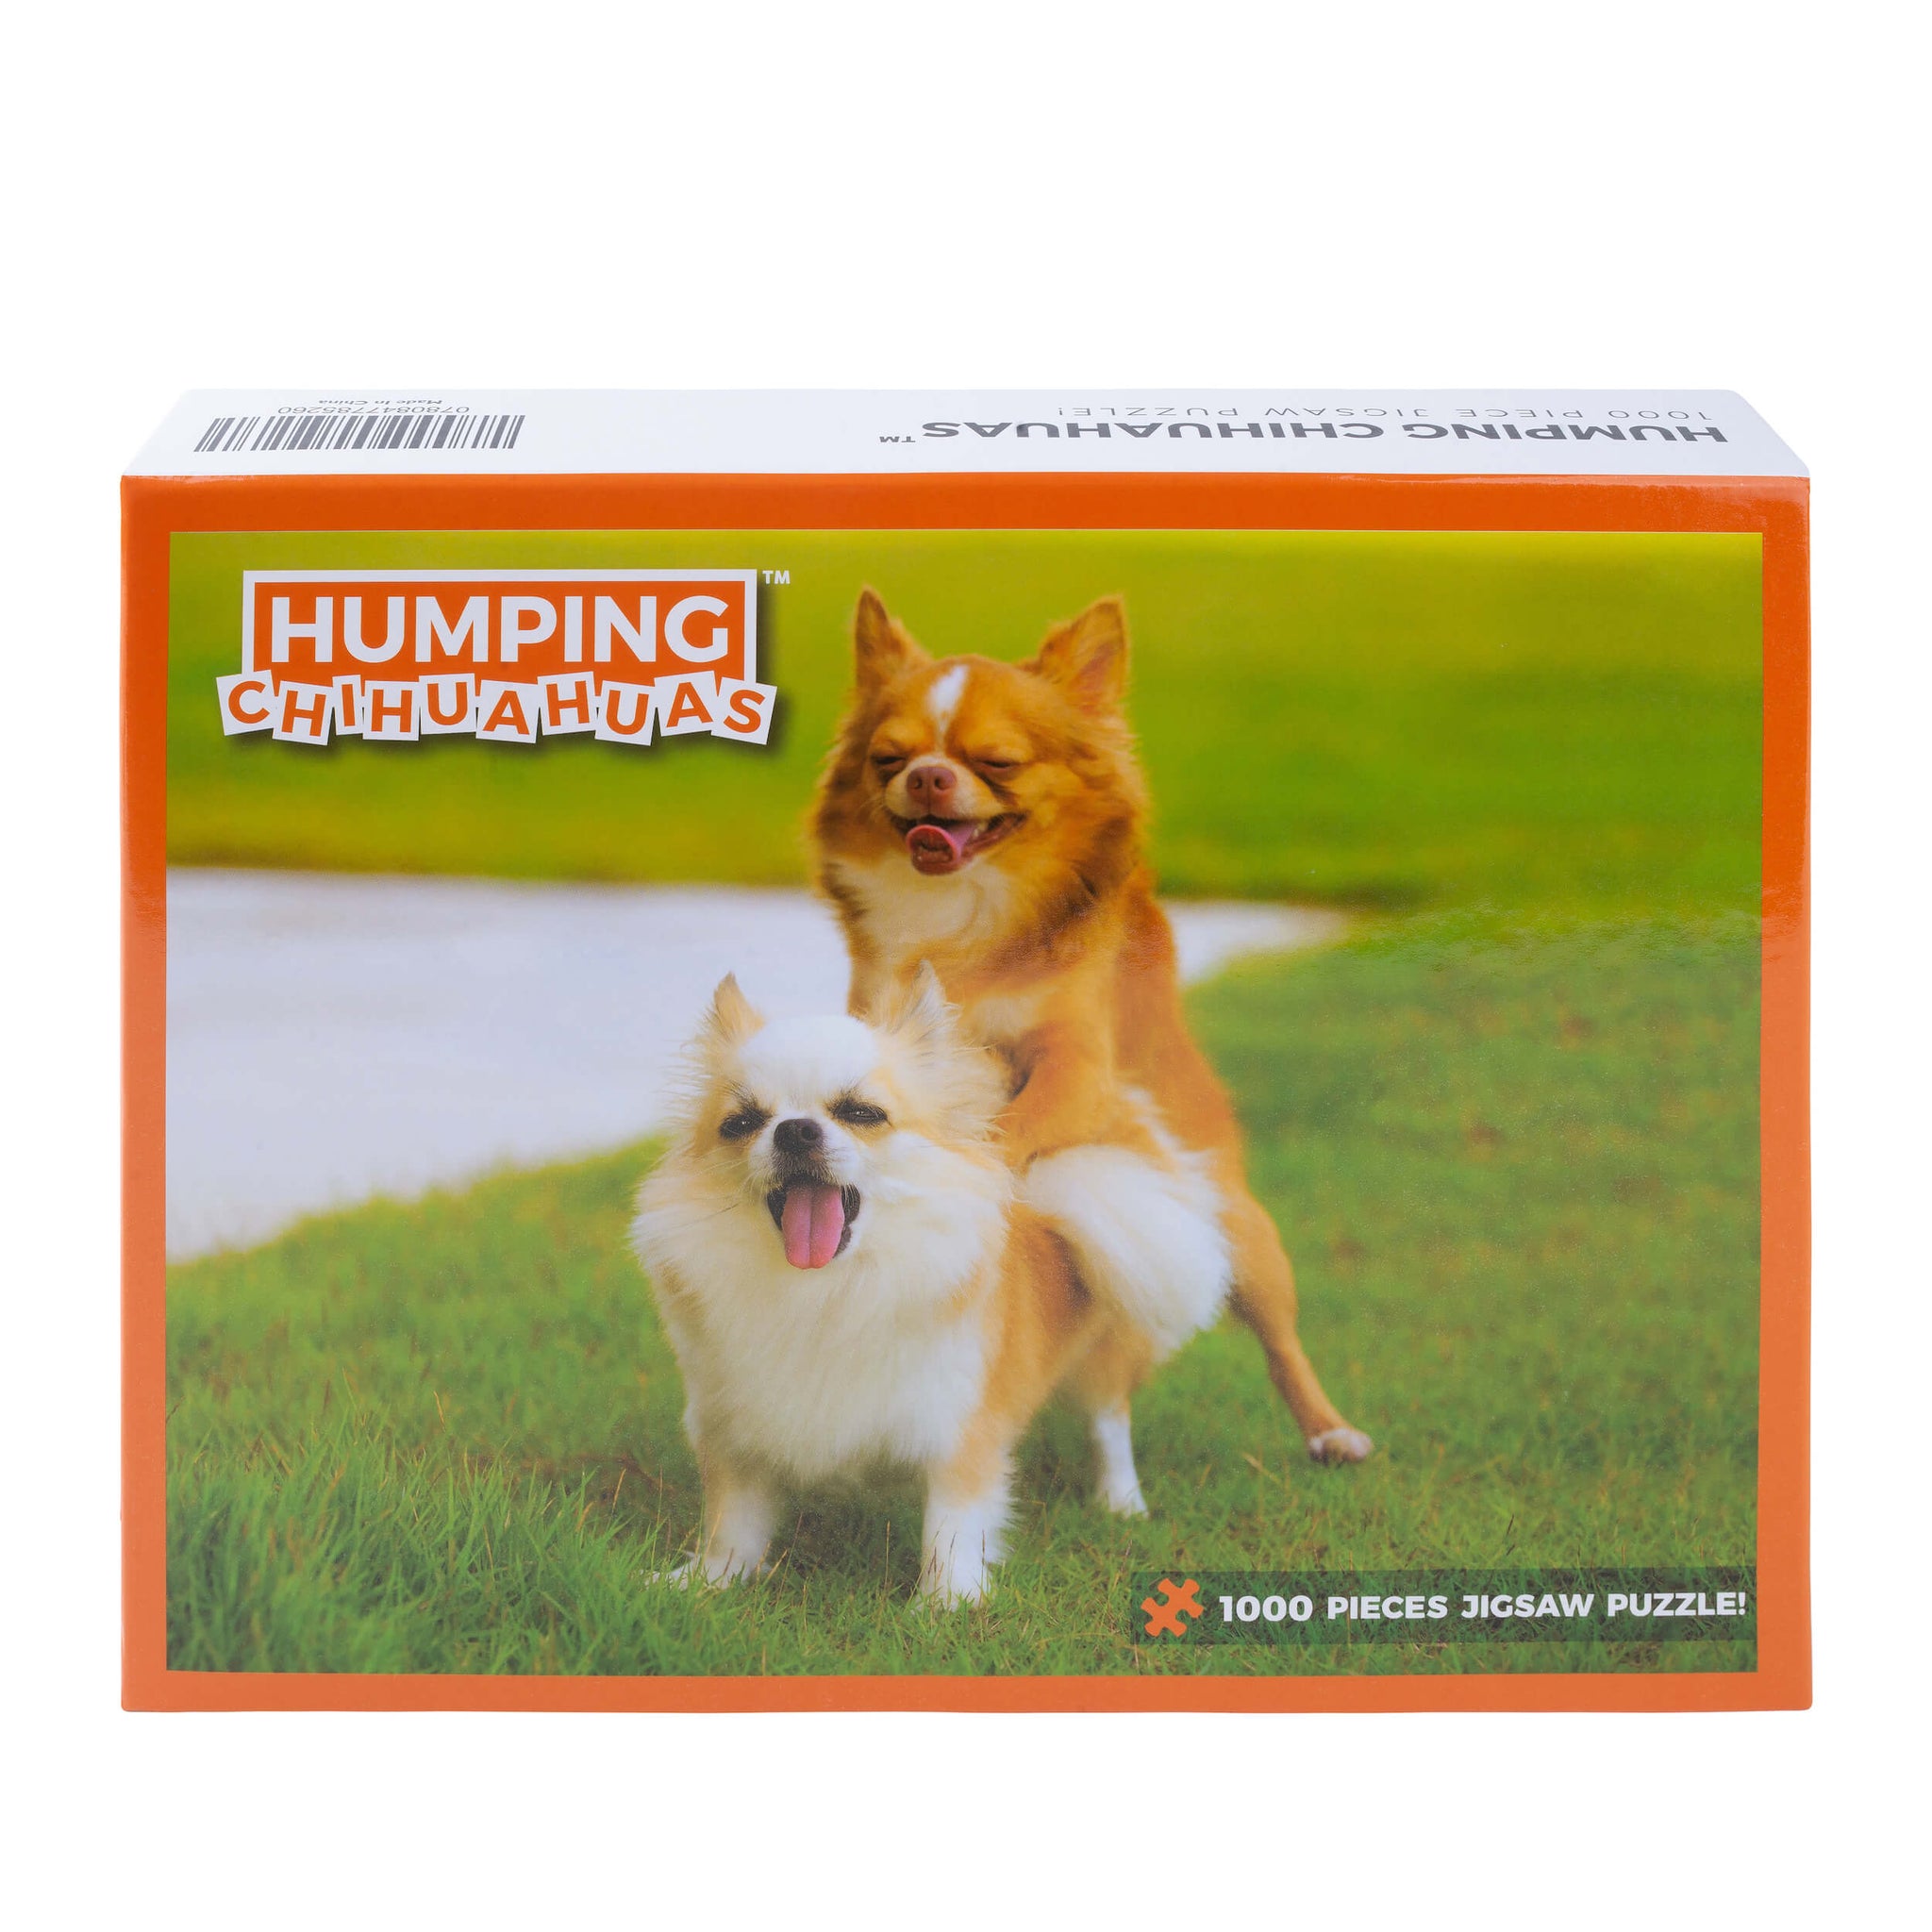 Humping Chihuahuas Jigsaw Puzzle - Funny Gag Gift for Dog Lovers and Owners - 1000 Piece Puzzle